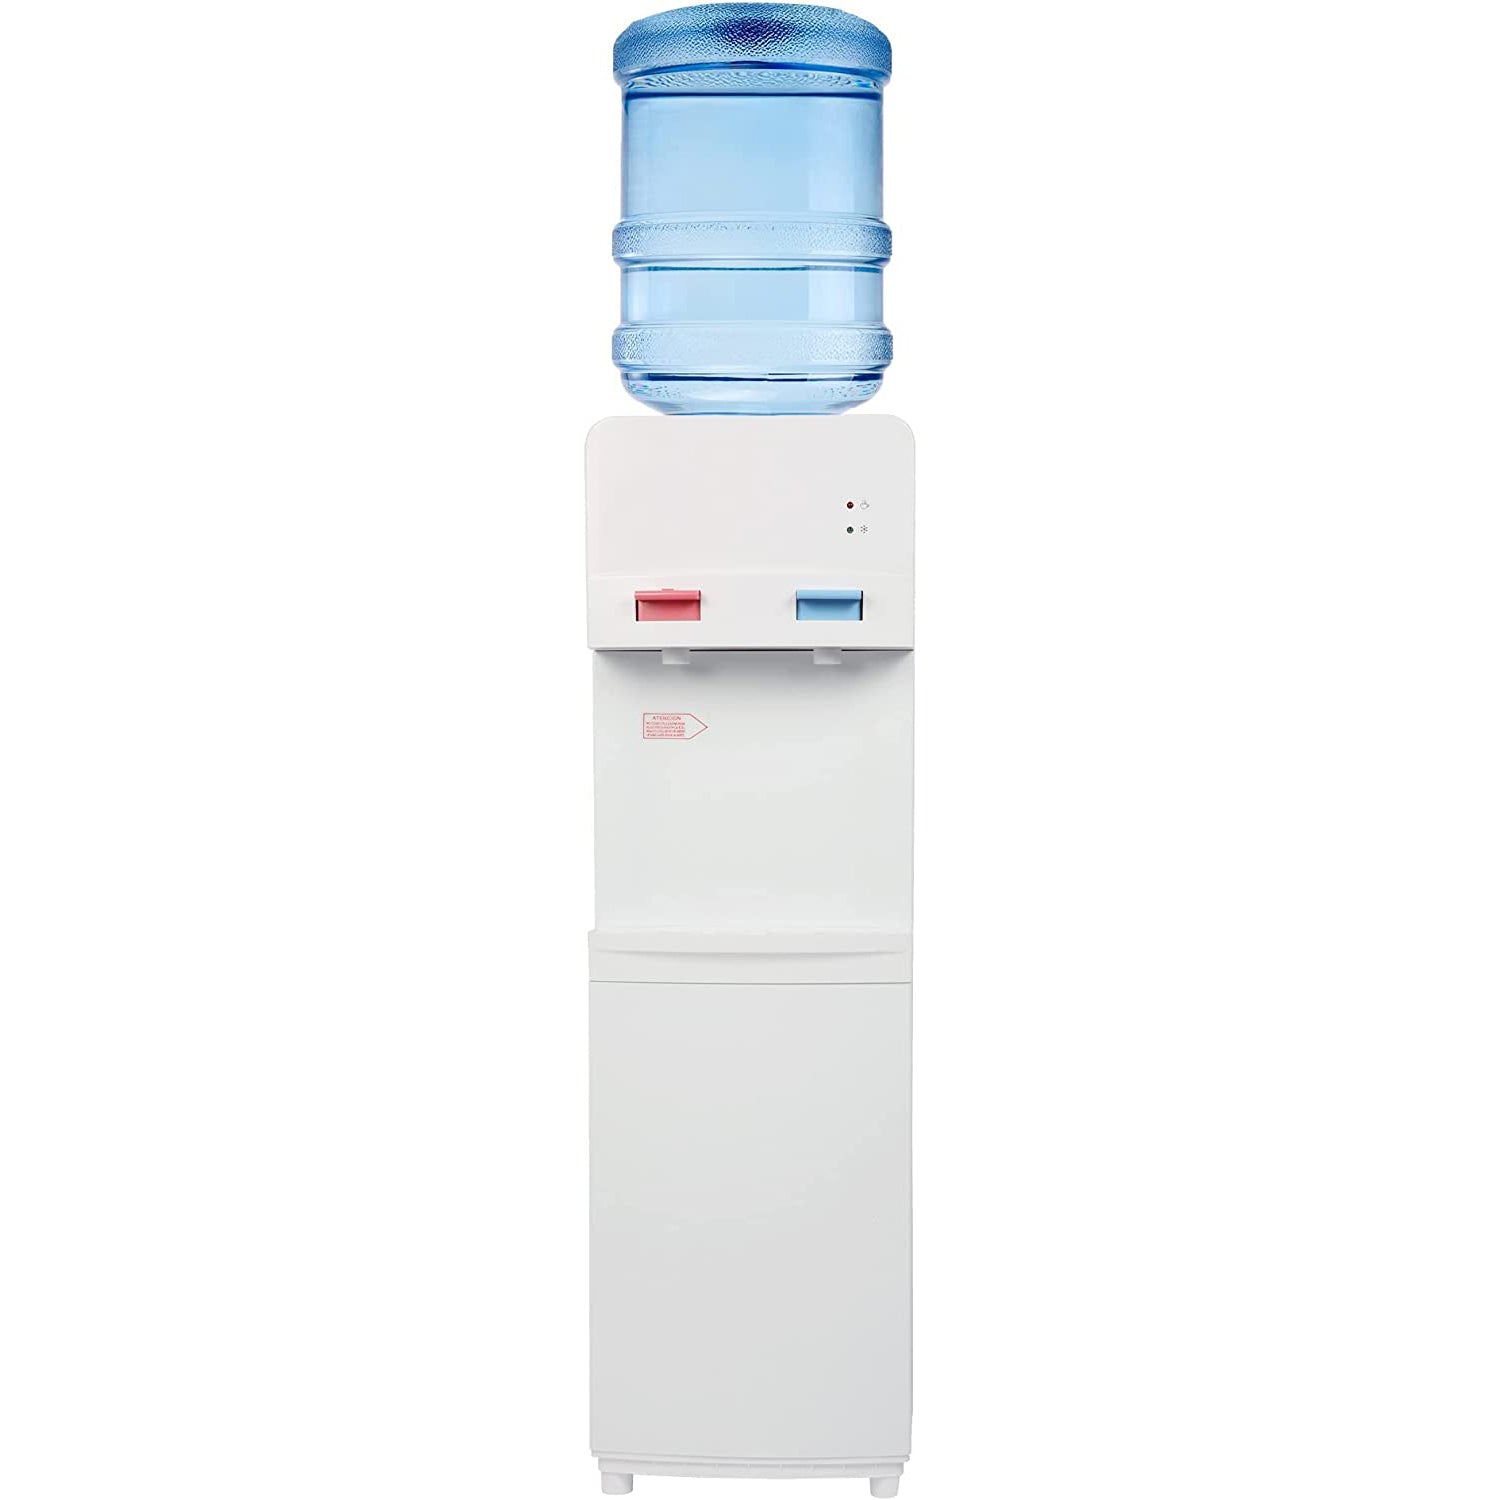 5 Gallon Top Loading Water Cooler Water Dispenser with Child Safety Lock, 2 Temps (Hot & Cold), ETL Listed, White